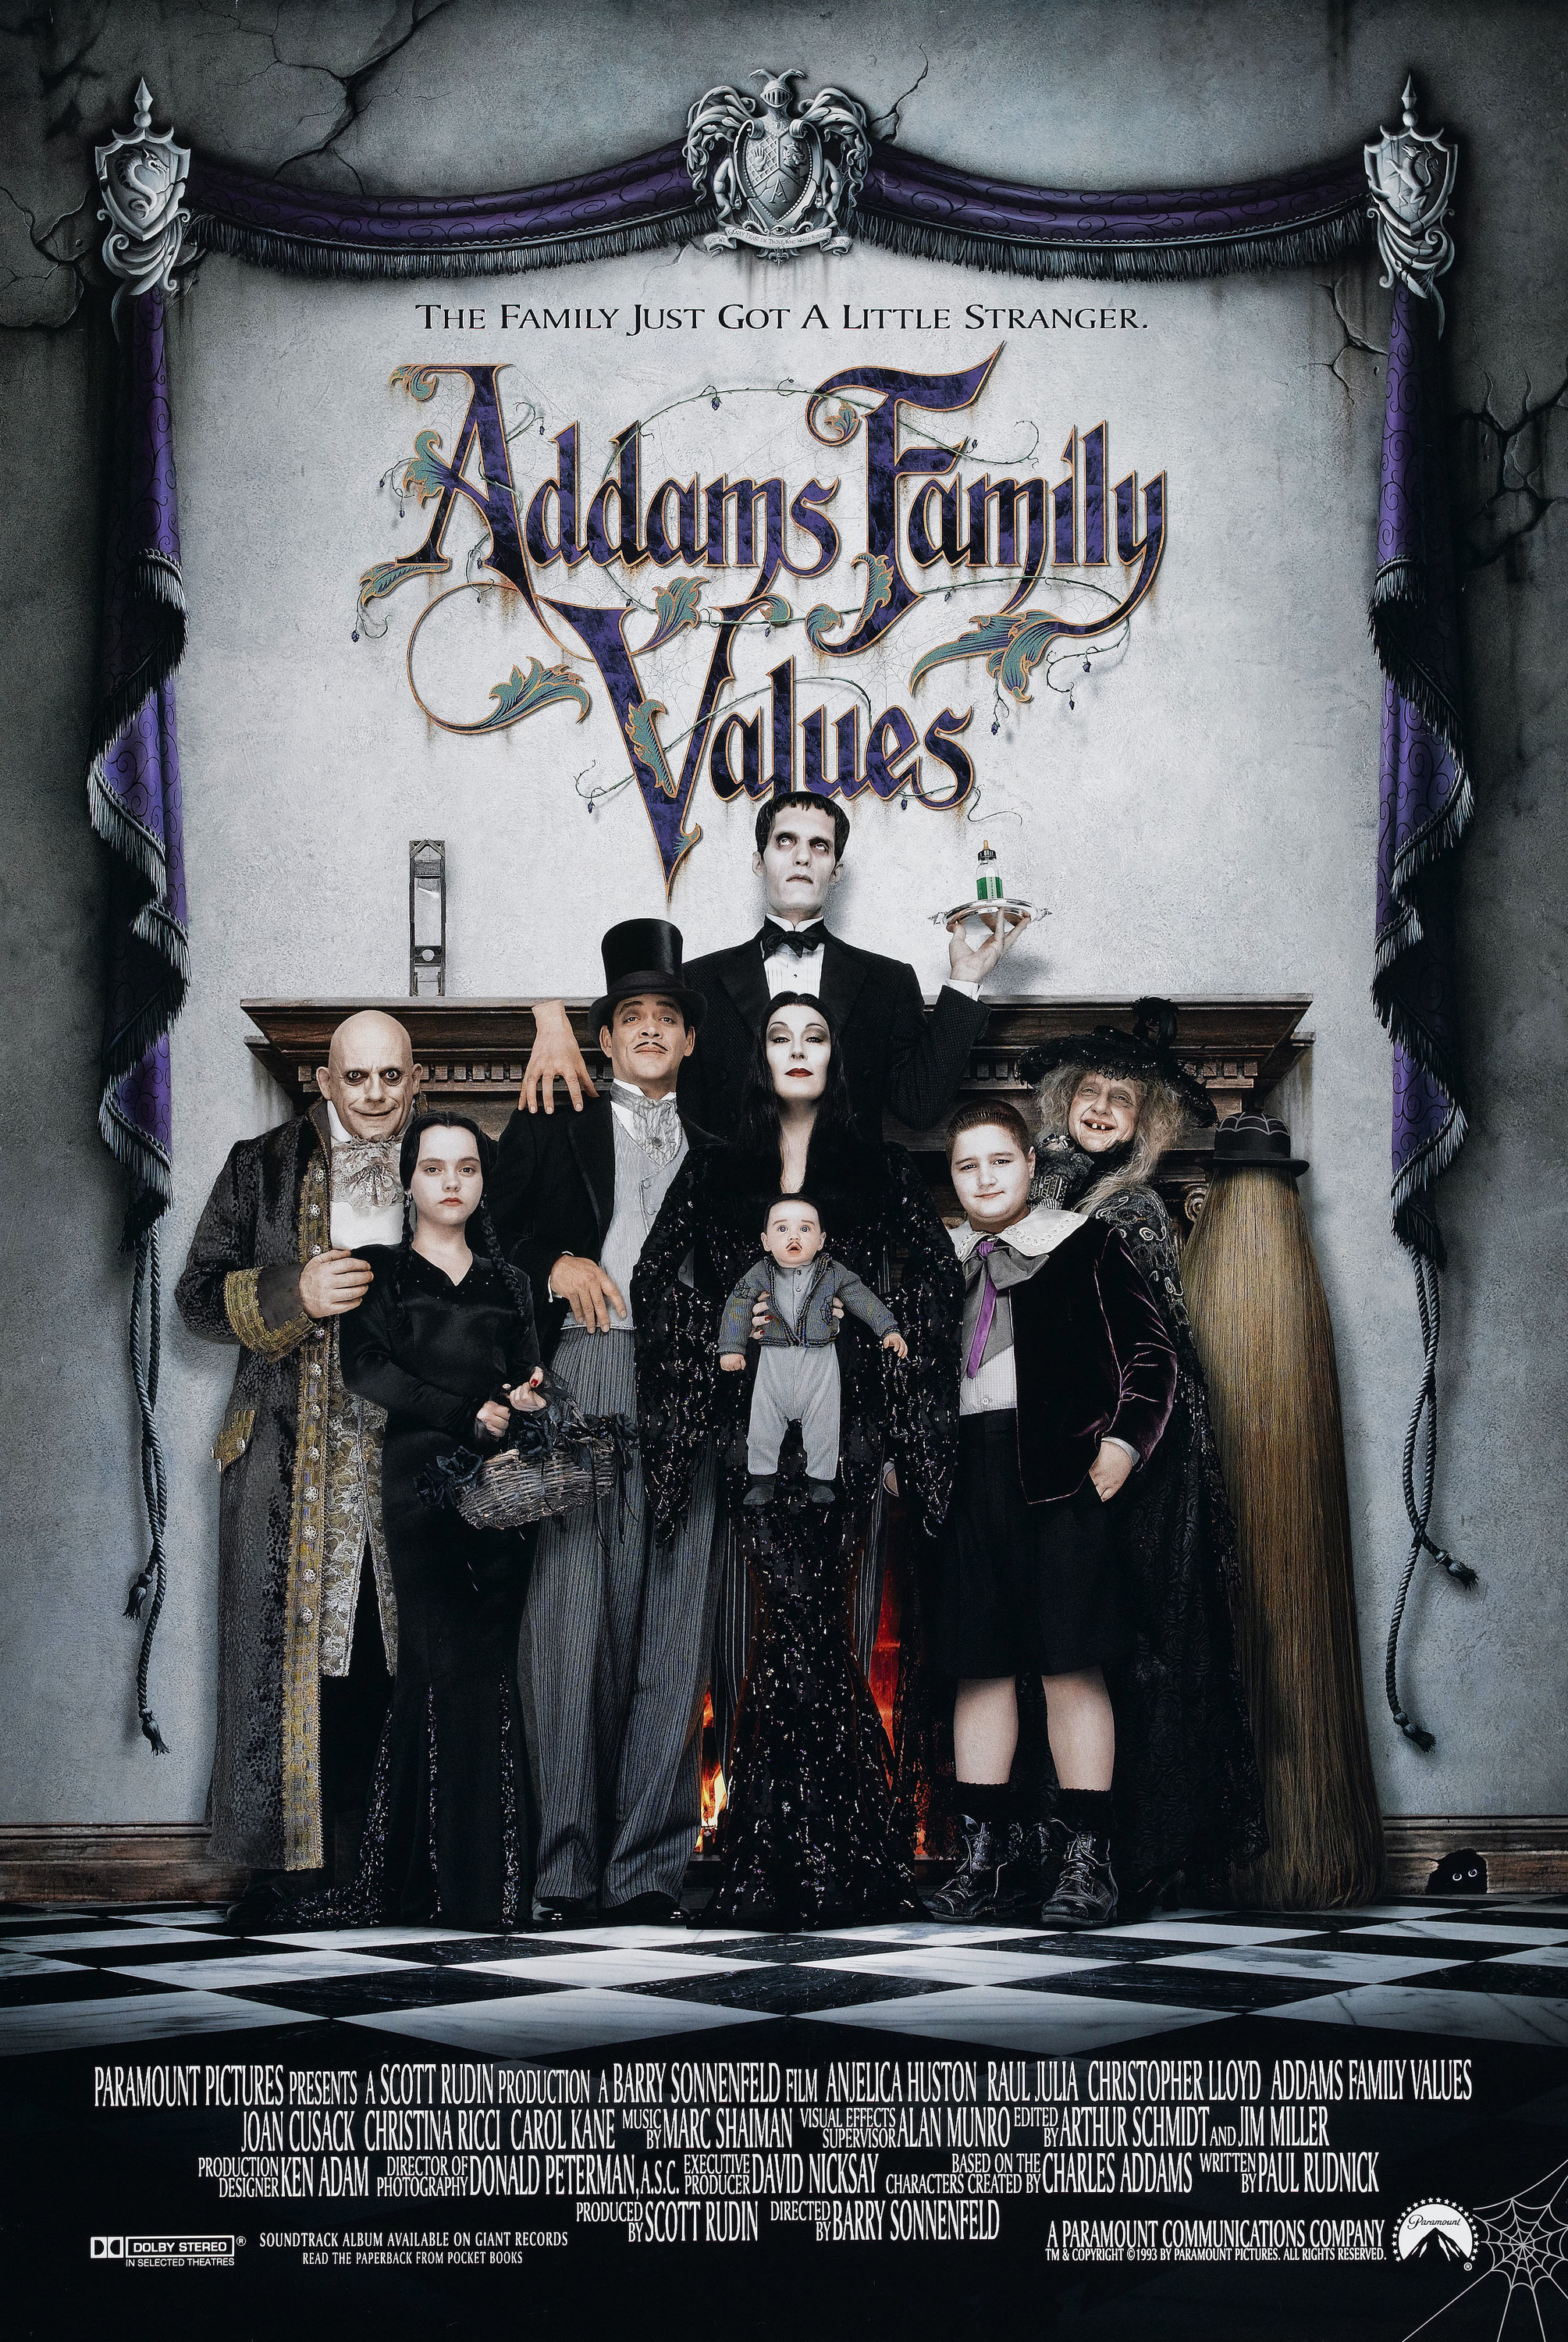 A scene from the original script of Episode 1 showed The Addams